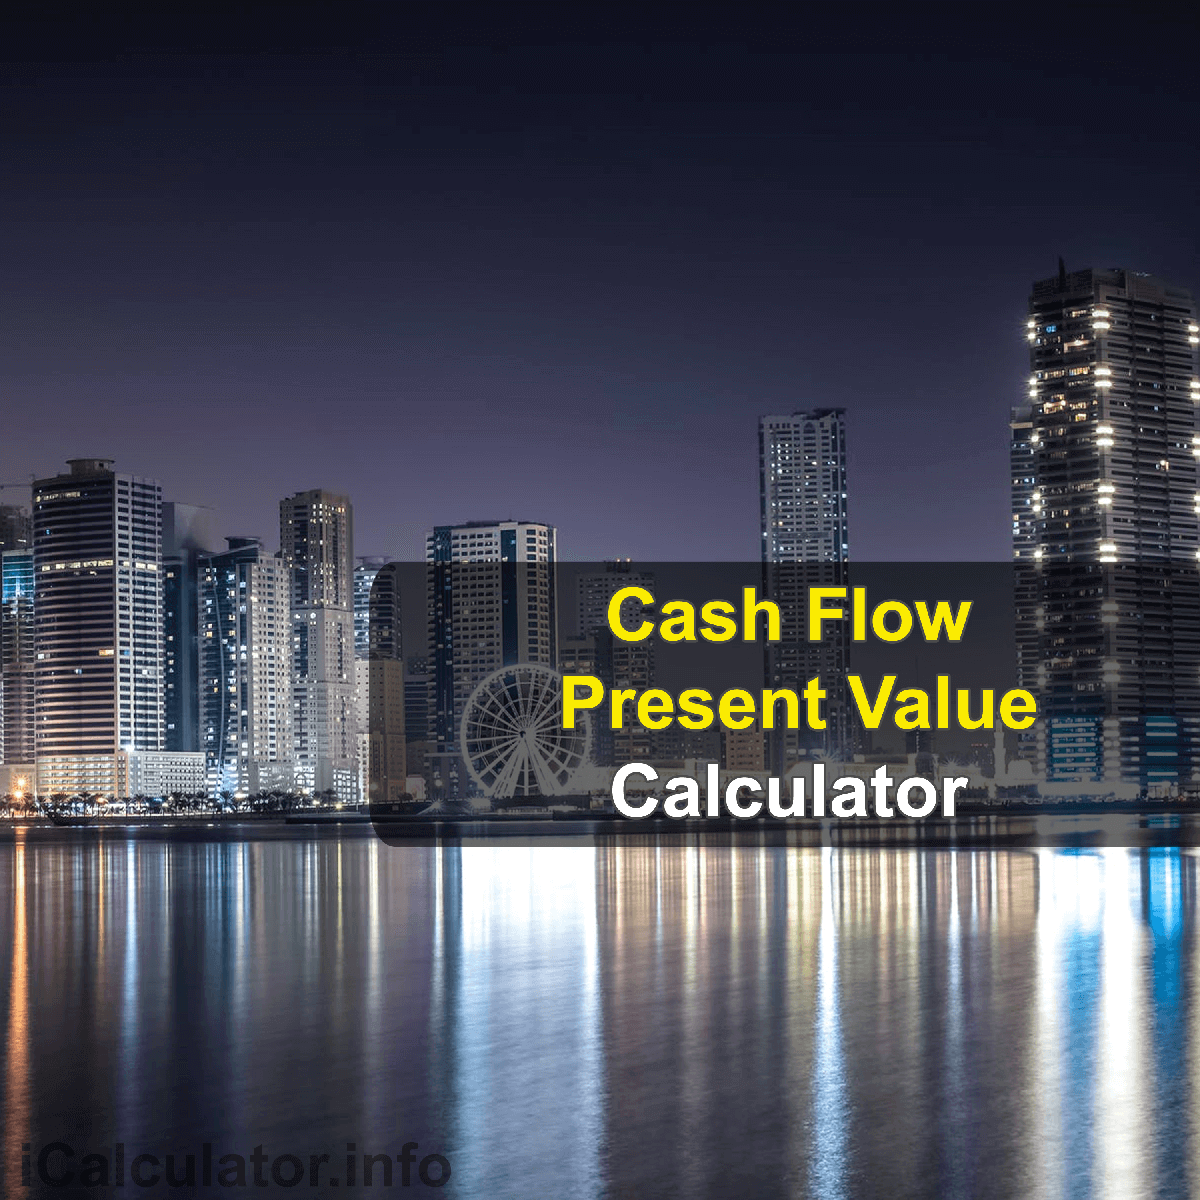 Present Value of Cash Flows Calculator. This image provides details of how to calculate the present value of cash flows using a calculator and notepad. By using the present value of cash flows formula, the Present Value of Cash Flows Calculator provides a true calculation of the funds received in the near future whether they are worth as much as their value today